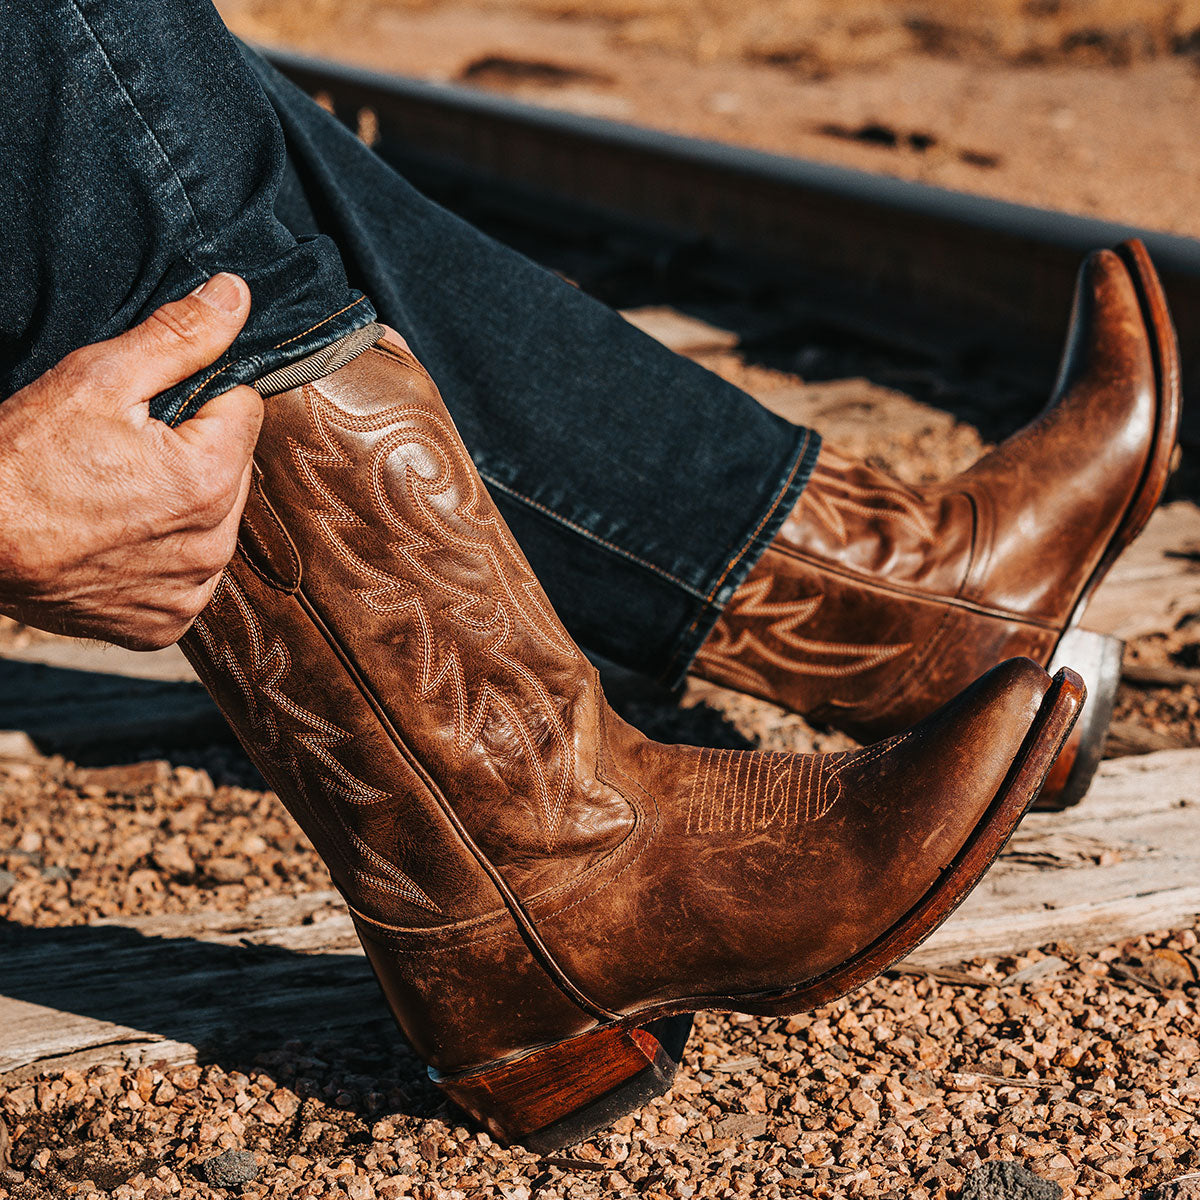 FREEBIRD men's Marshall brown leather western cowboy boot with shaft stitch detailing, snip toe construction and leather pull straps